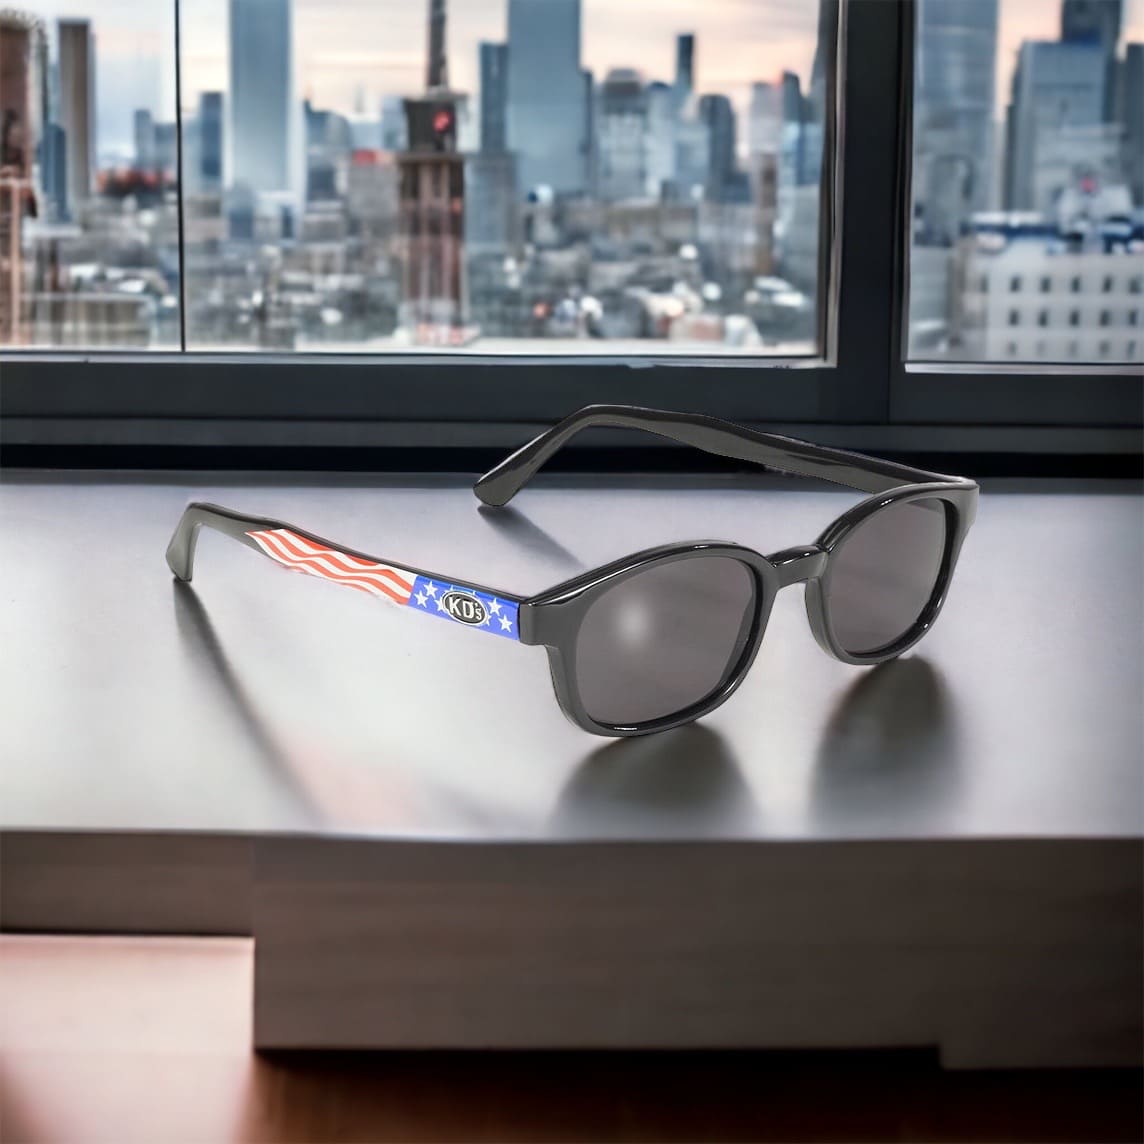 KD's 20050 sunglasses that fit under a motorcycle or ski helmet. With a sturdy frame decorated with the U.S. flag and gray tinted lenses placed in front of a window with a view of New York.